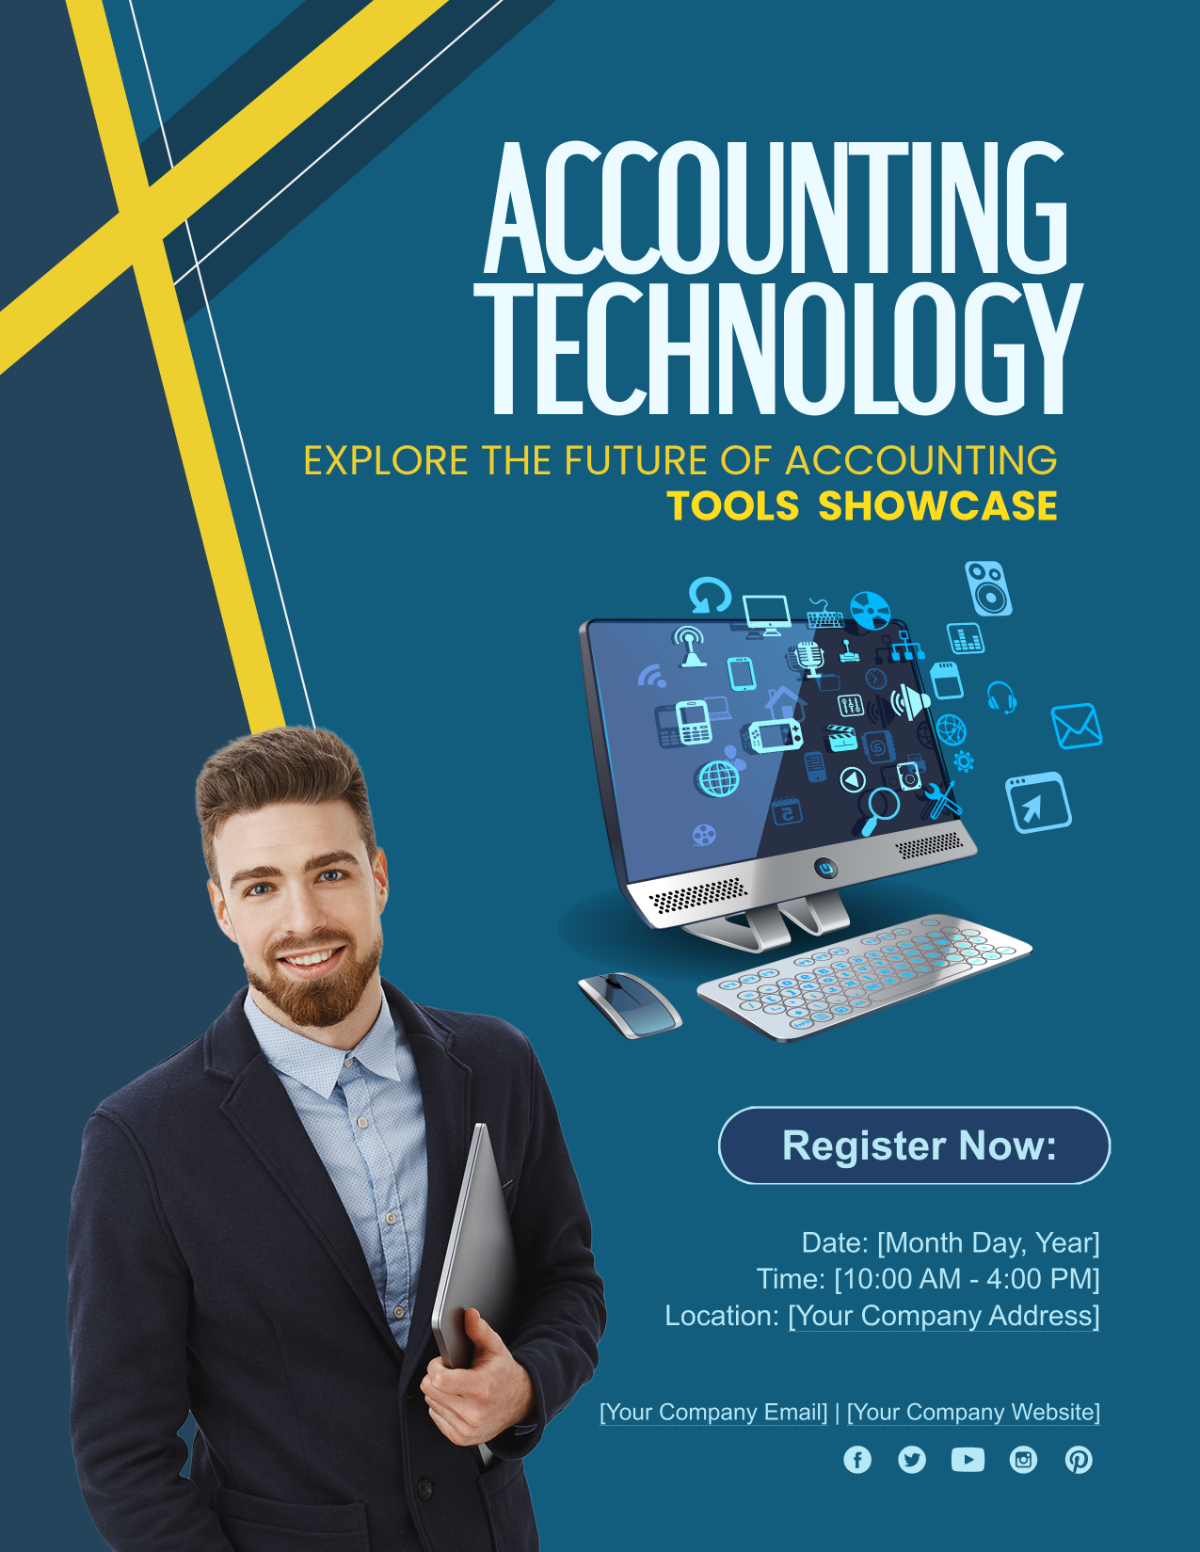 Accounting Technology Tools Showcase Flyer